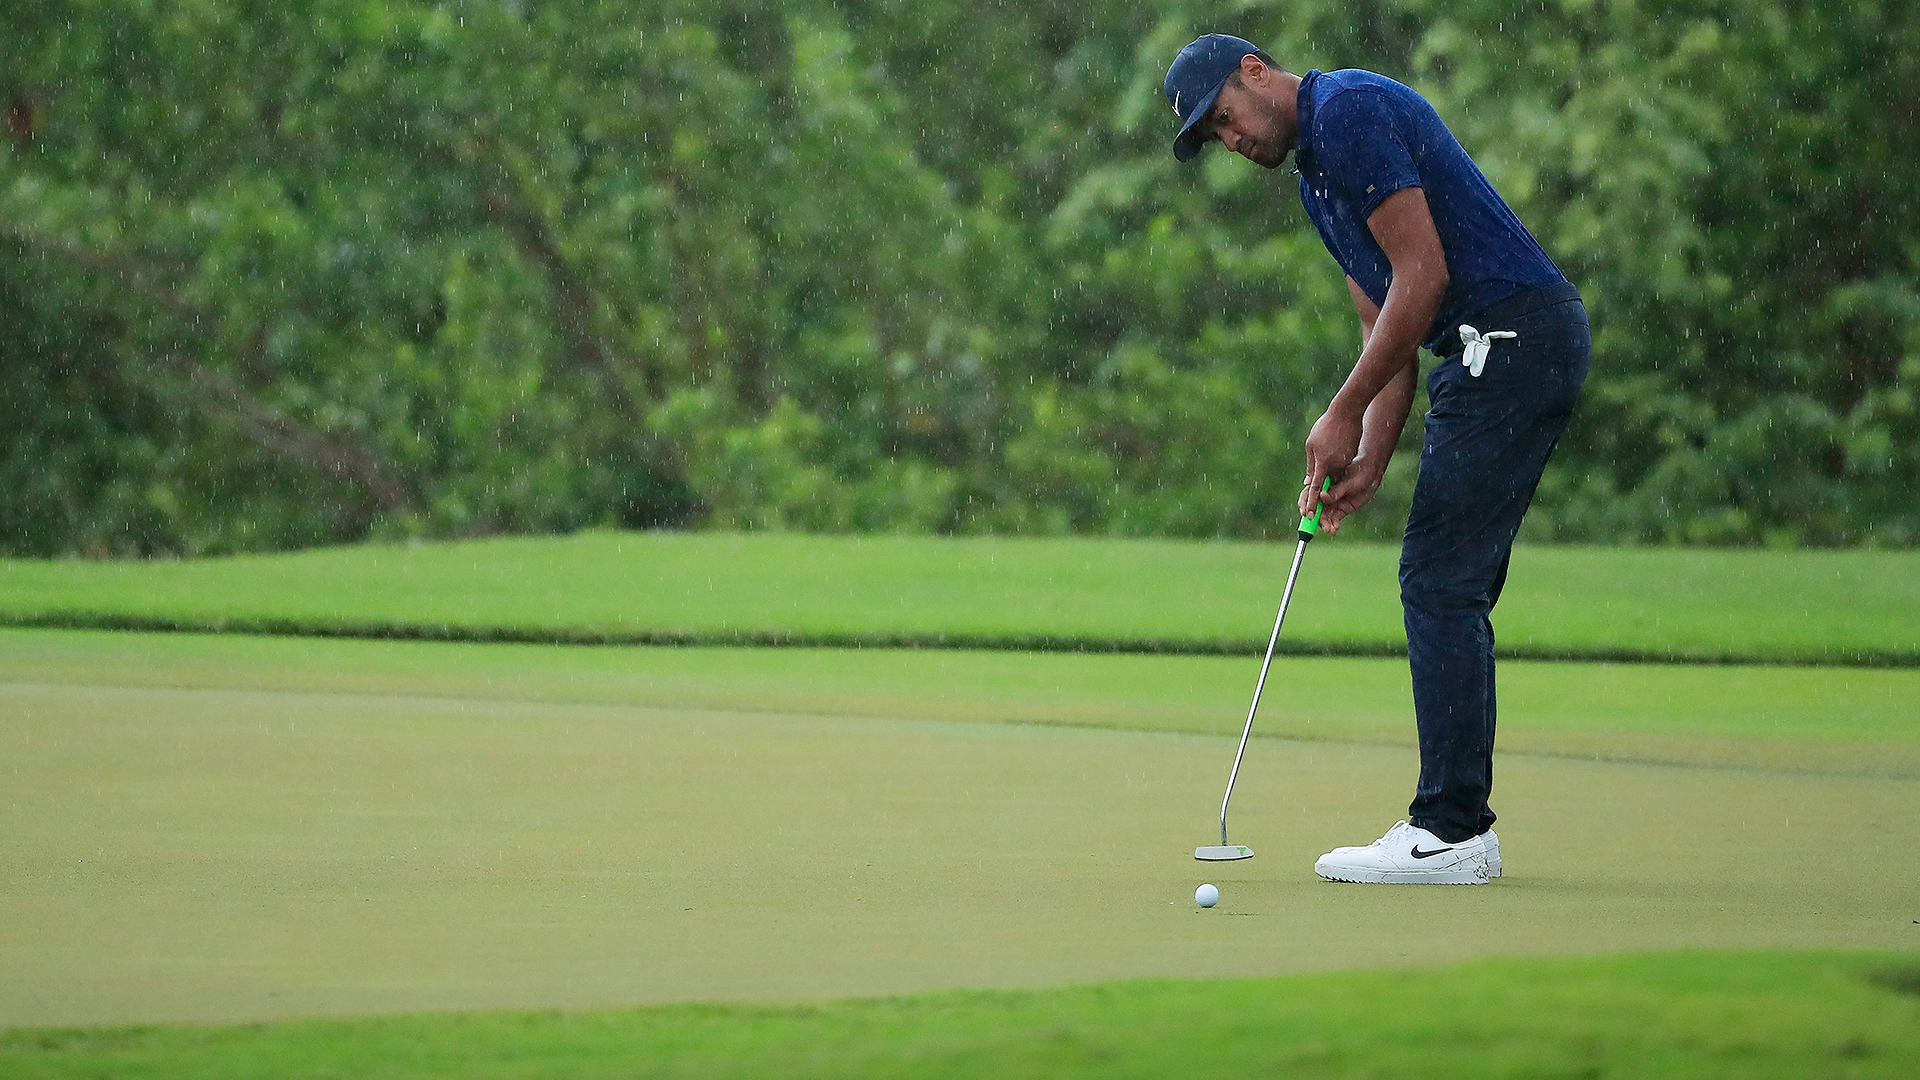 Tony Finau boosted by putting, not driving, on way to Mayakoba co-lead 2